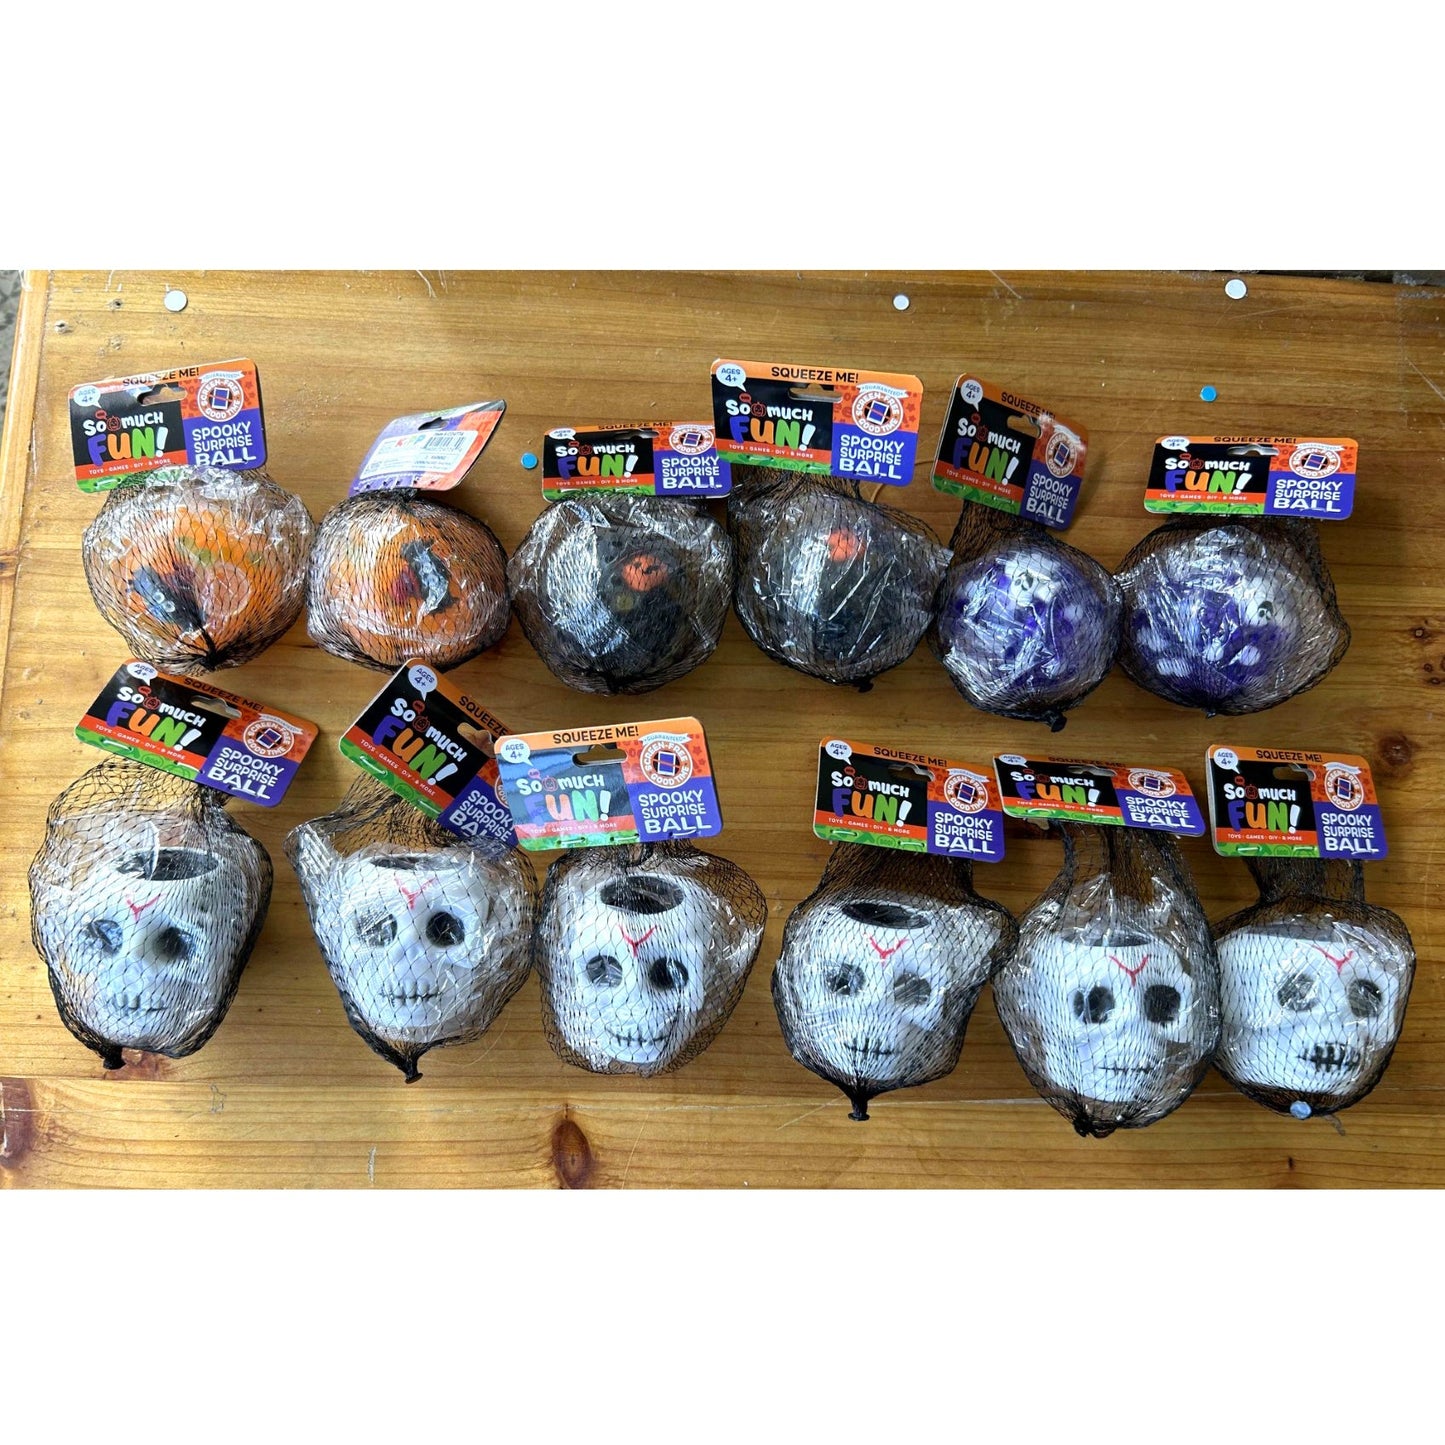 Halloween Squishy Ball Assortment- Store Surplus No Display - 12 Pieces Per Pack 24774L